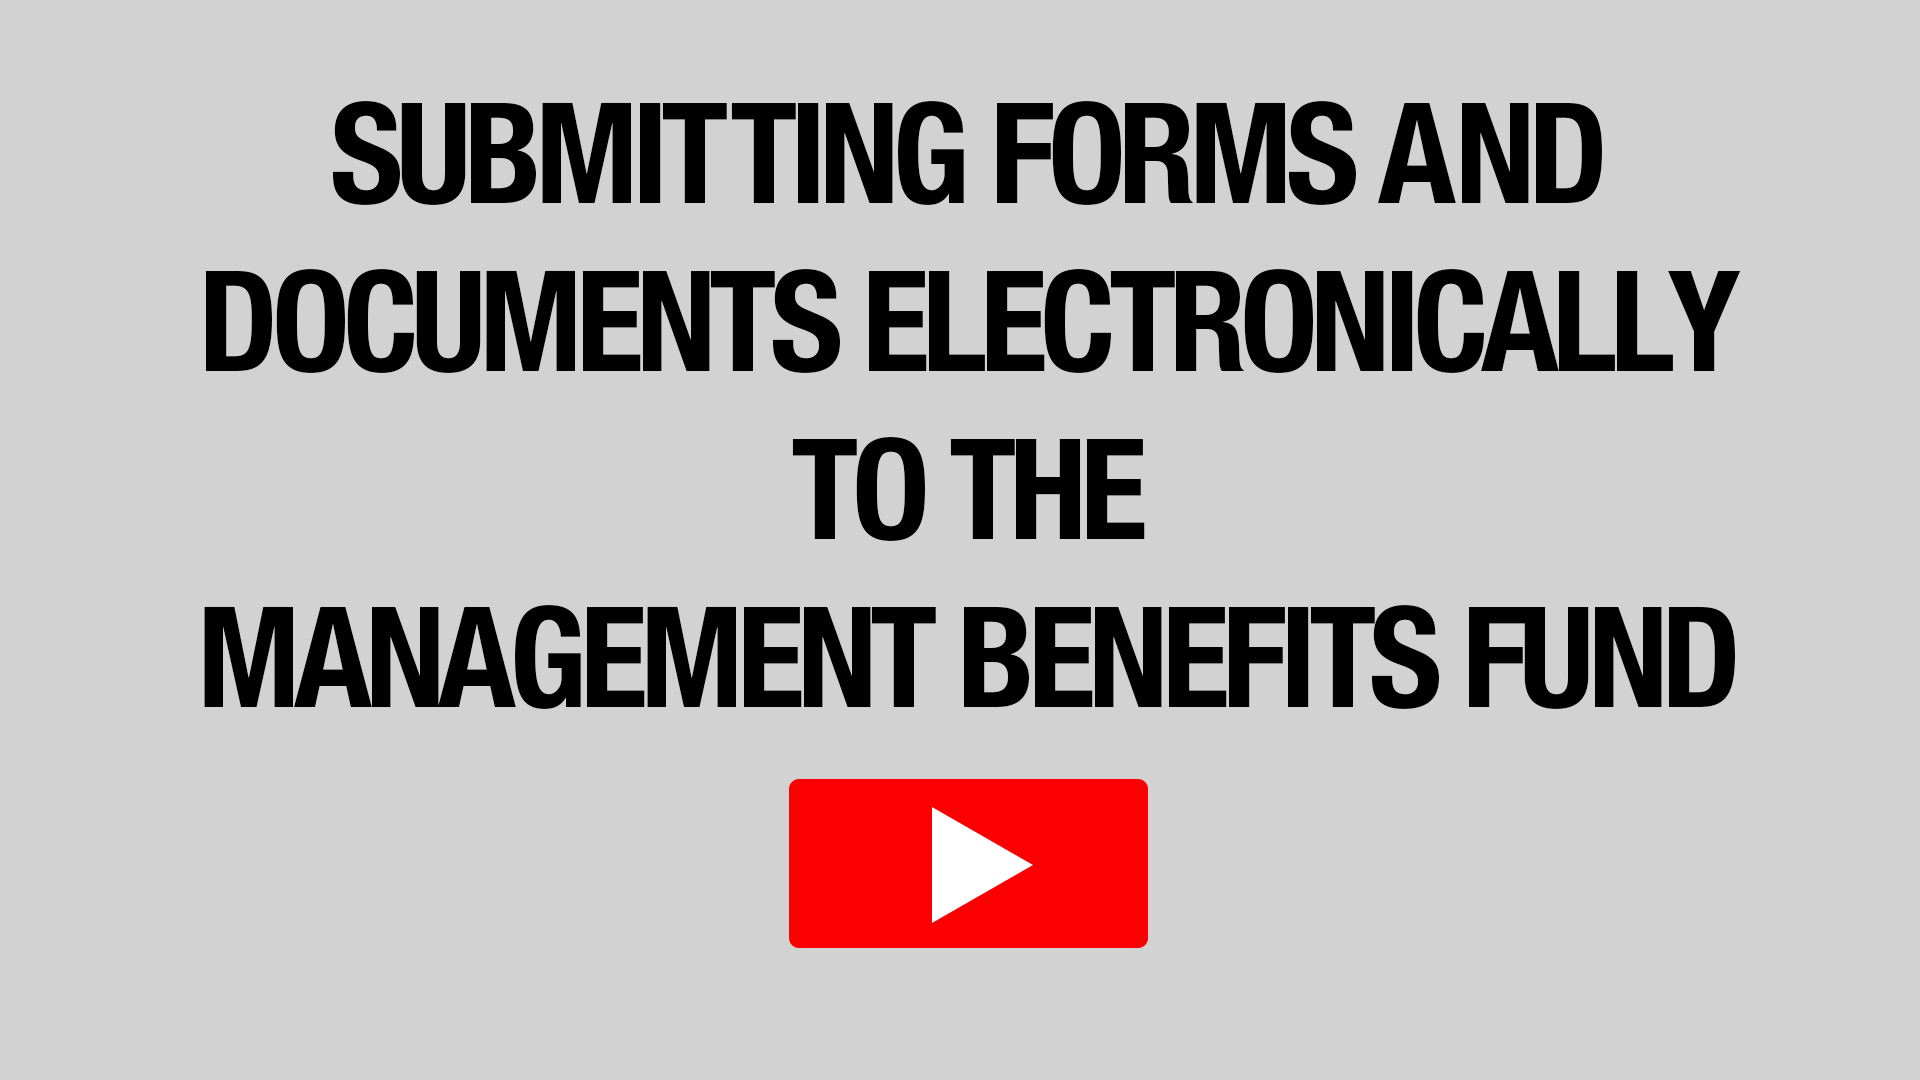 Submit Forms and Documents Electronically to MBF